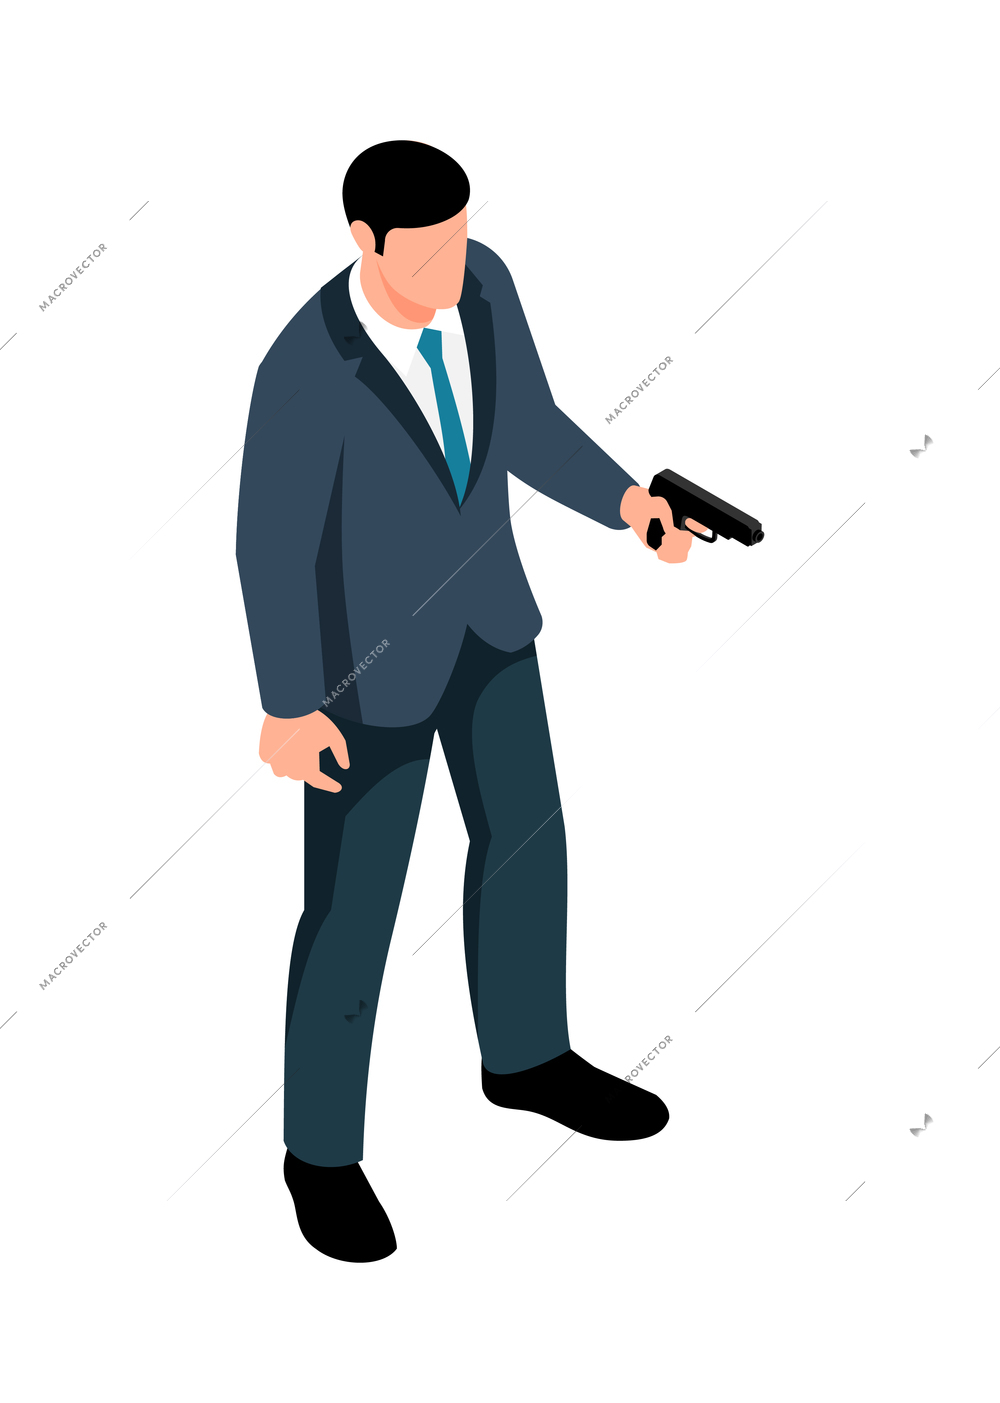 Isometric criminal composition with isolated human character on blank background vector illustration